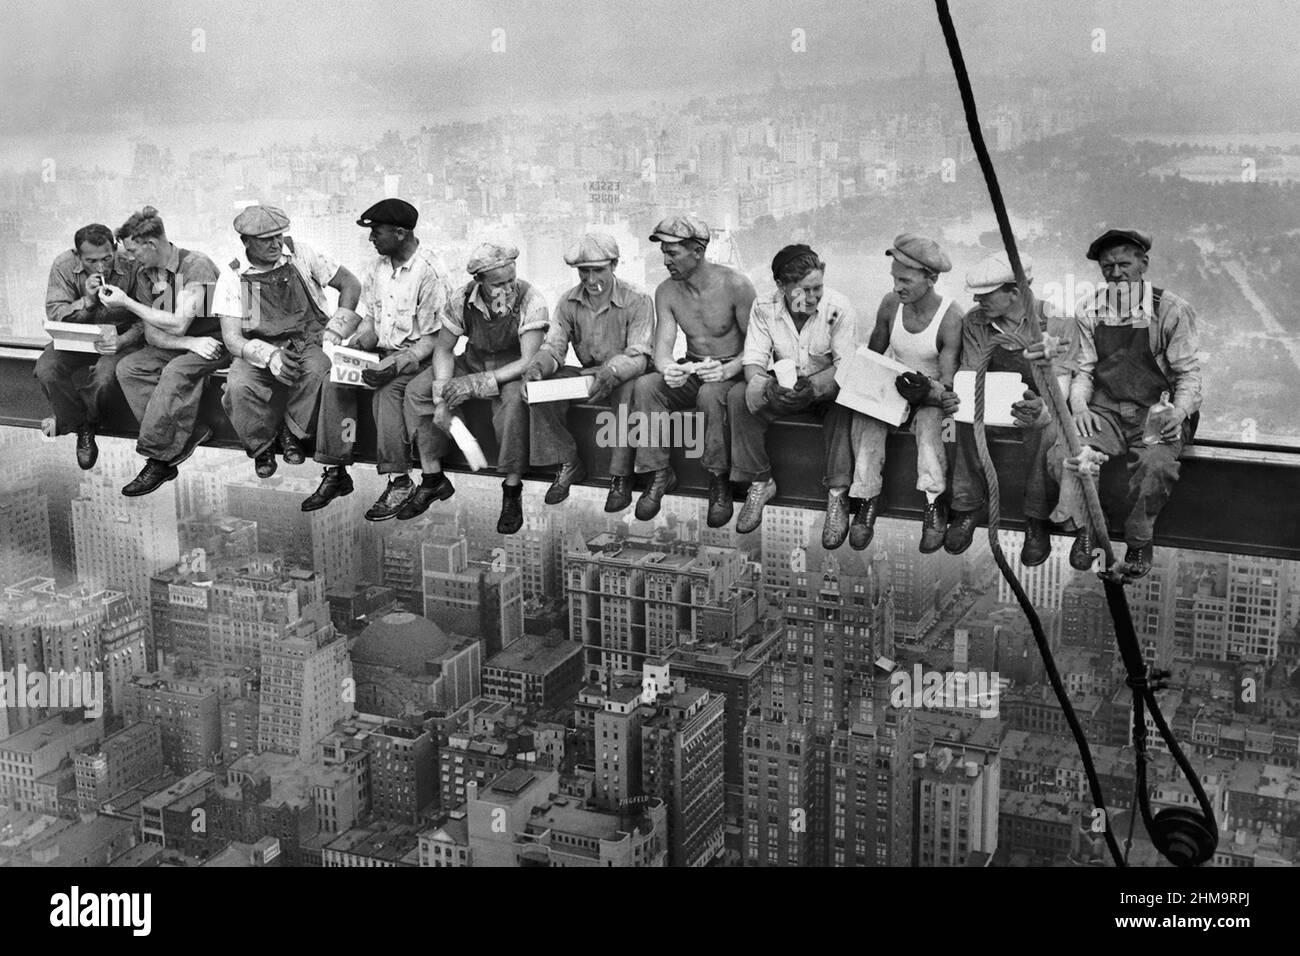 Charles Clyde Ebbets - Iconic American photograph - Lunch atop a New York Skyscraper - 1932 Stock Photo